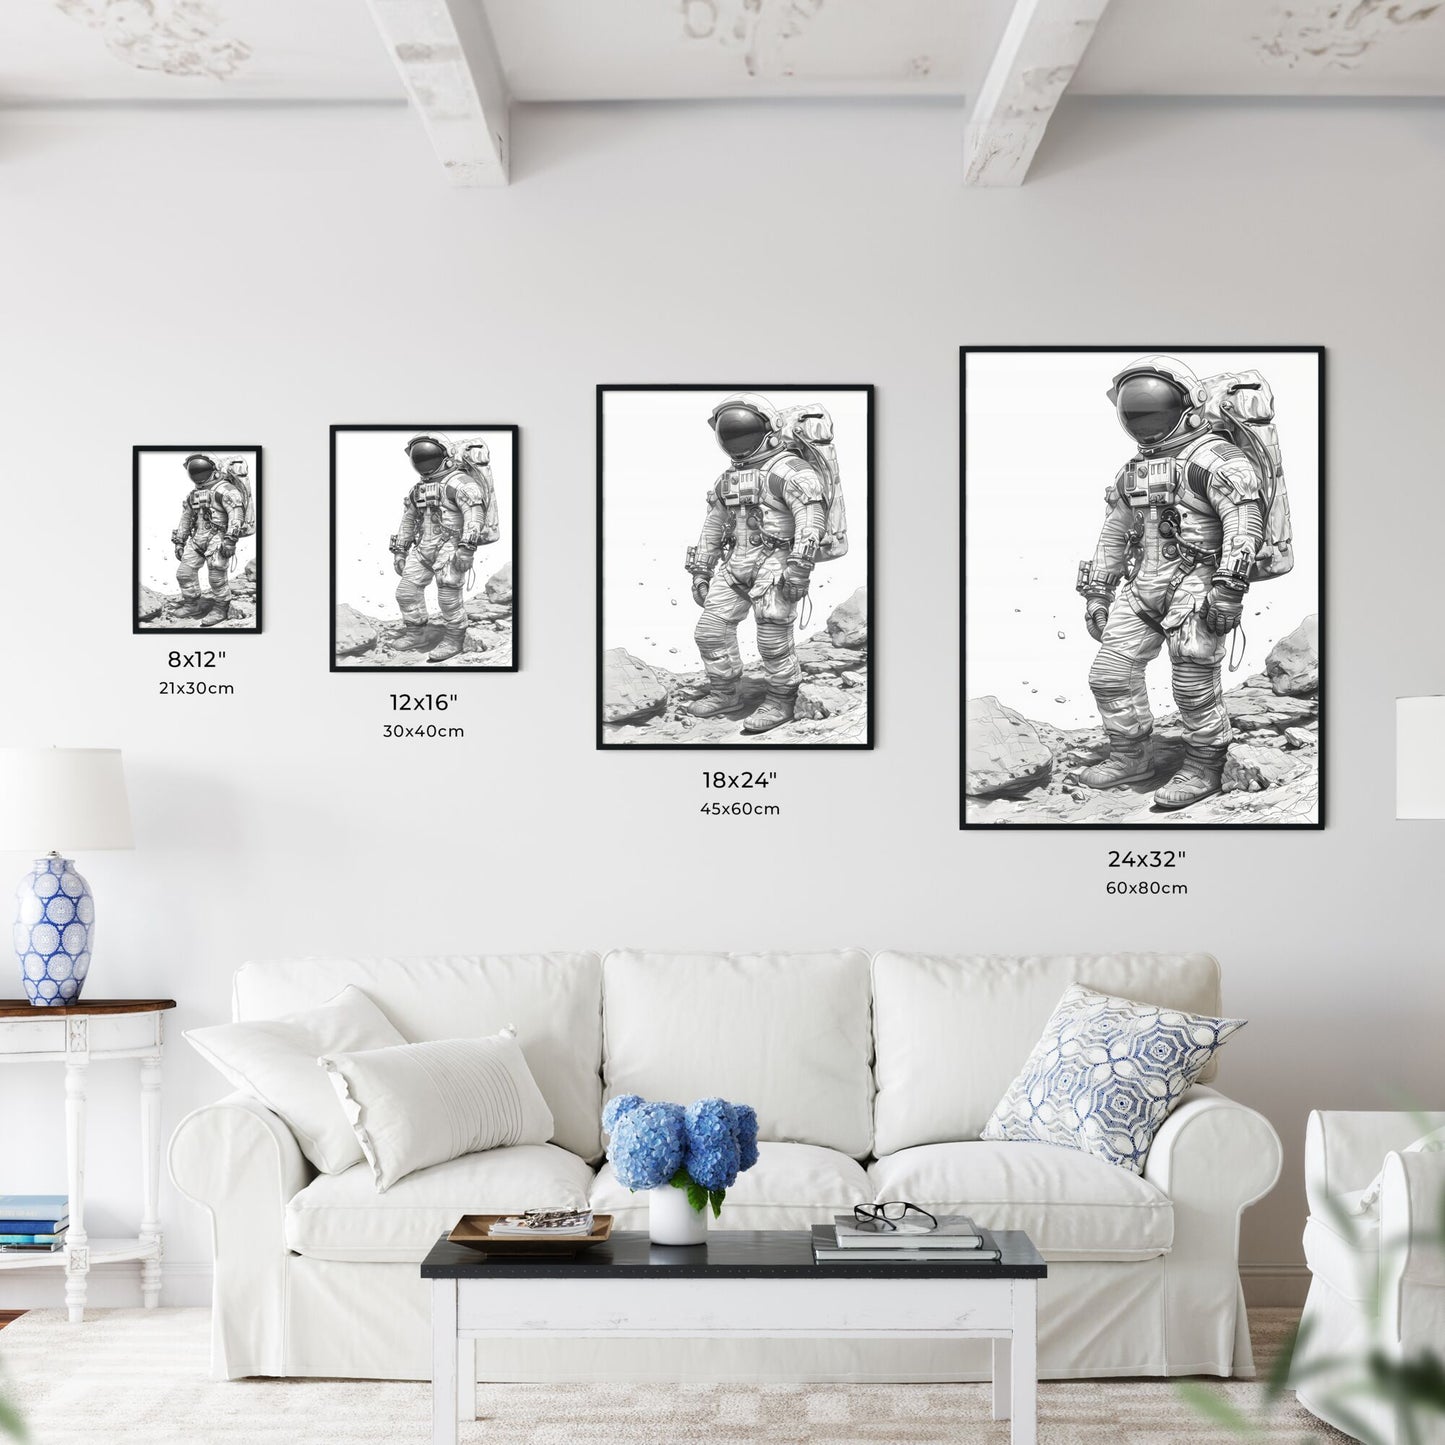 A Poster of Coloring page for kids spacesuits - A Drawing Of An Astronaut On A Rocky Surface Default Title